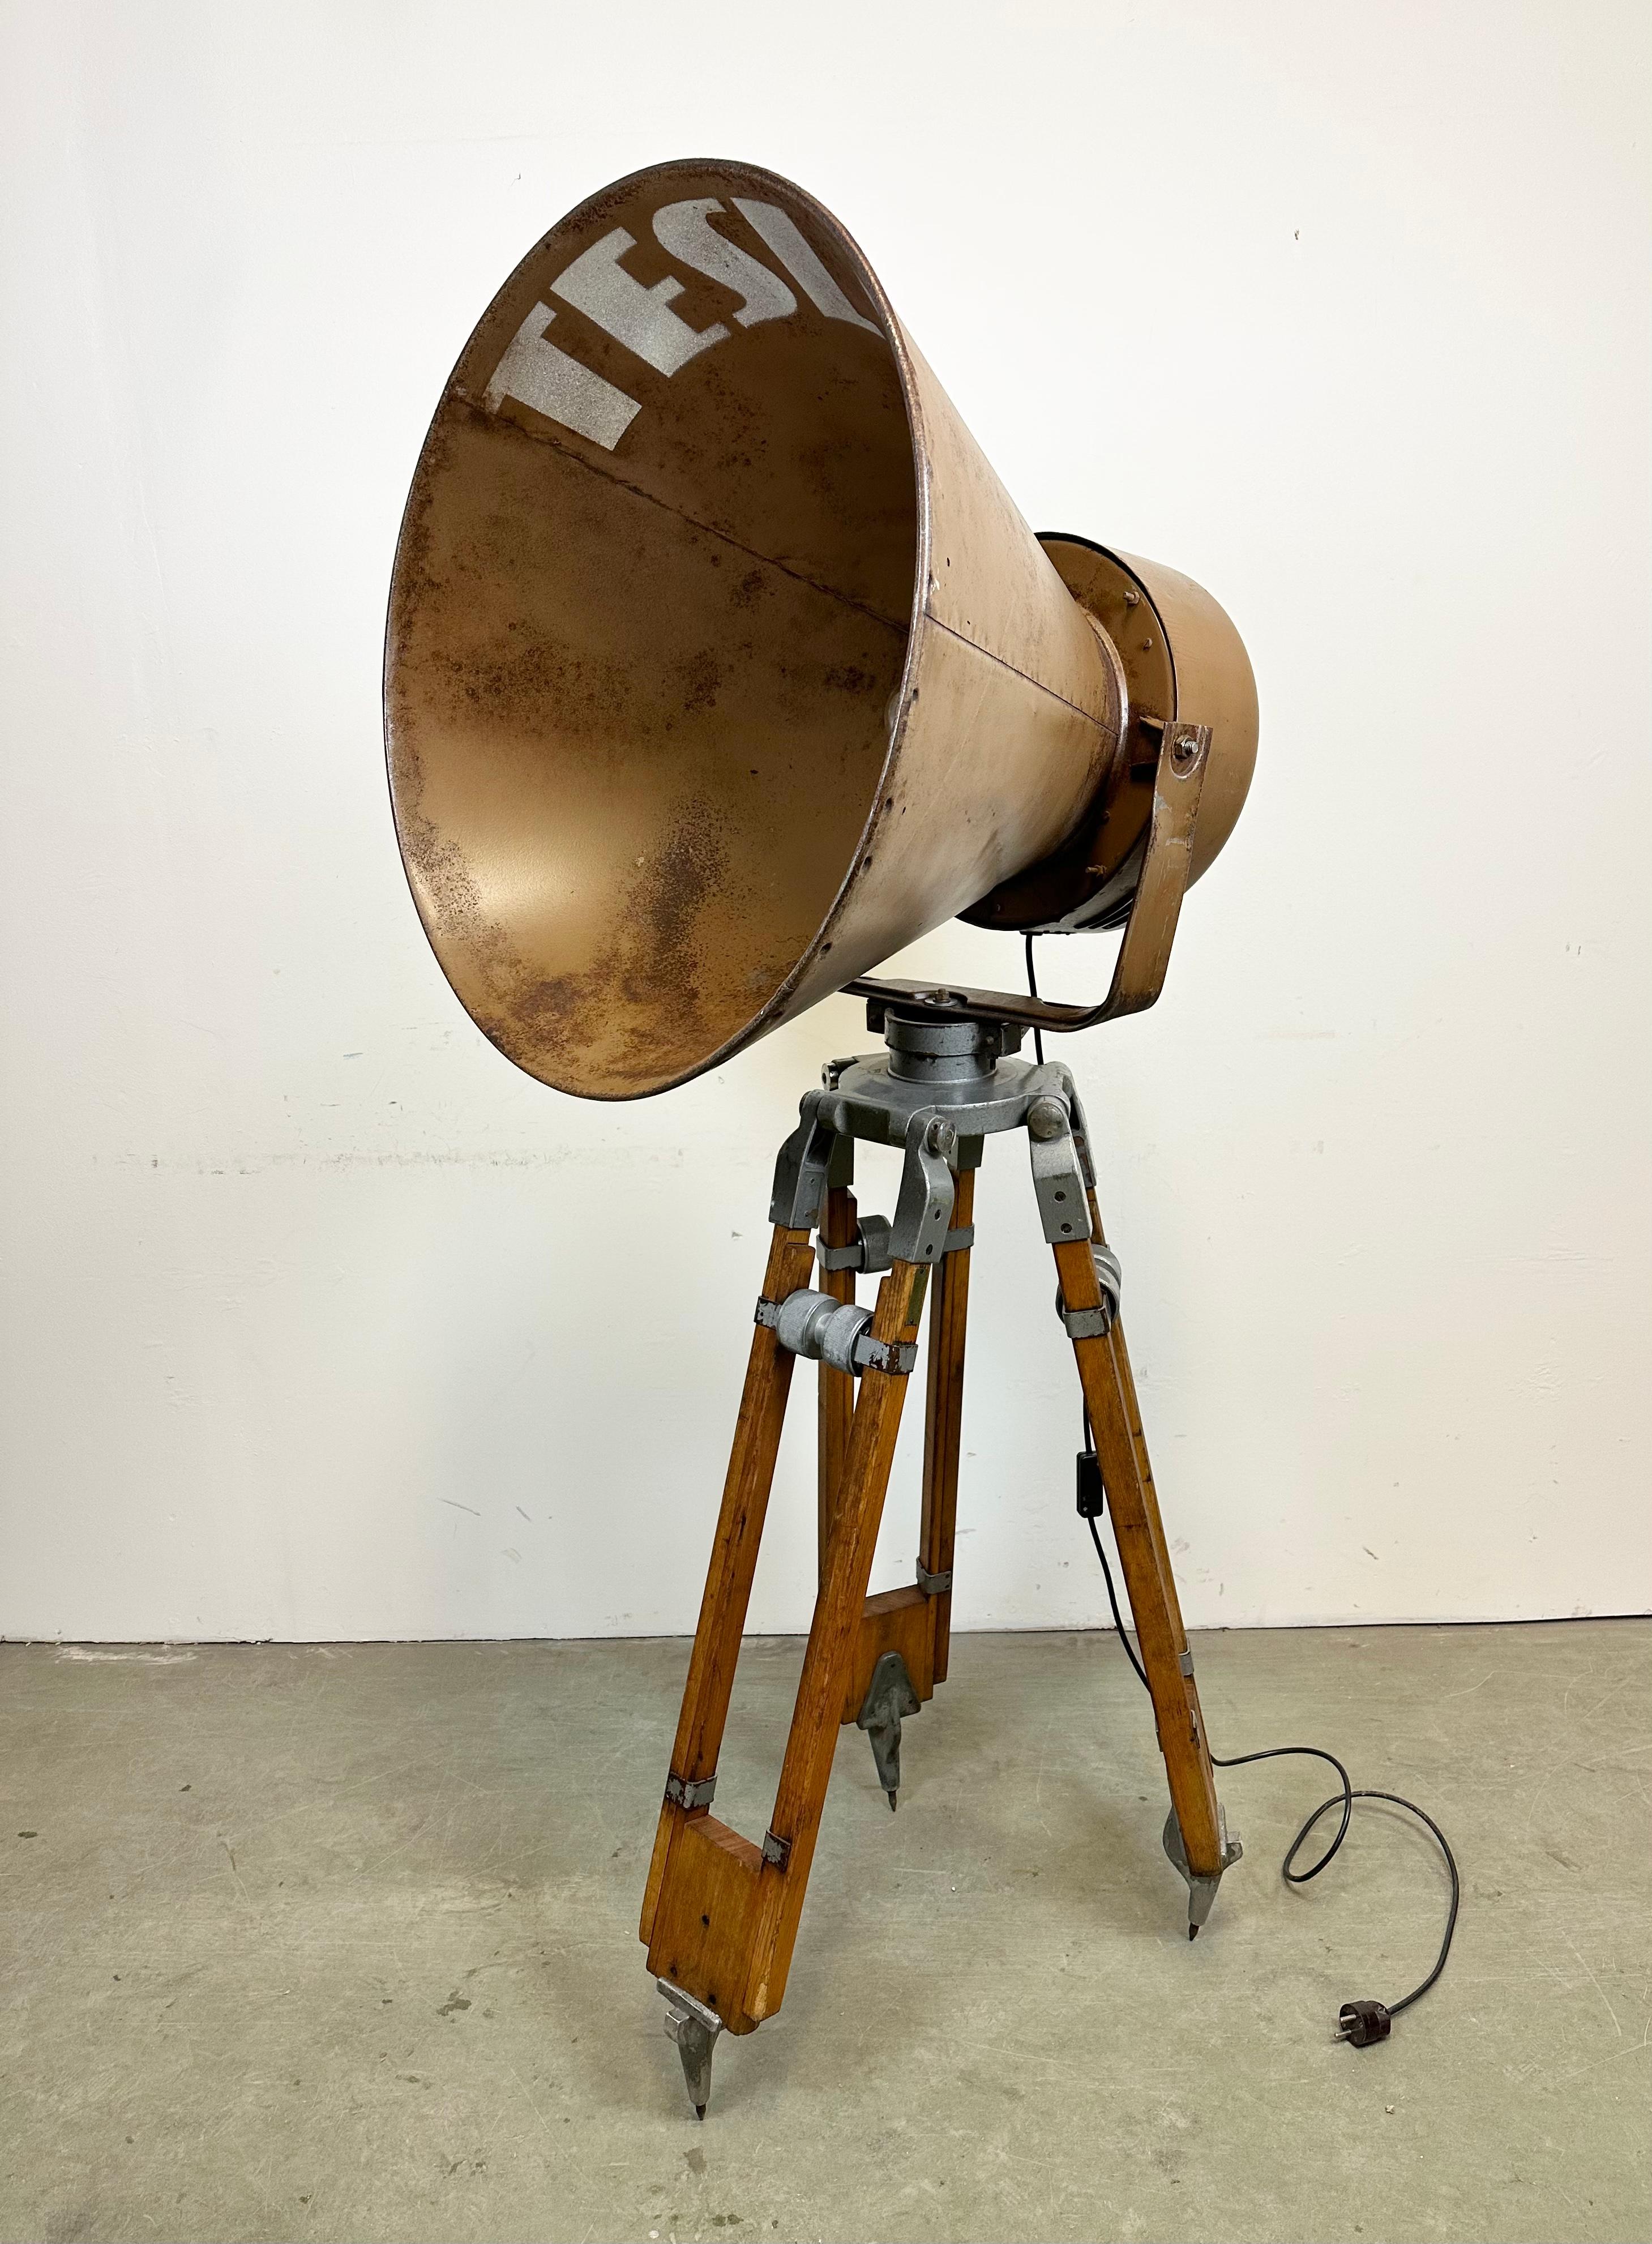 Former brown iron factory speaker Tesla, now serves as a spotlight on massive wooden tripoid.
- Dimensions of the spotlight :
 Height: 62 cm, Diameter 66 cm 
- Total height on the tripod: 165 cm
- New porcelain socket requires E 27/ E26 light